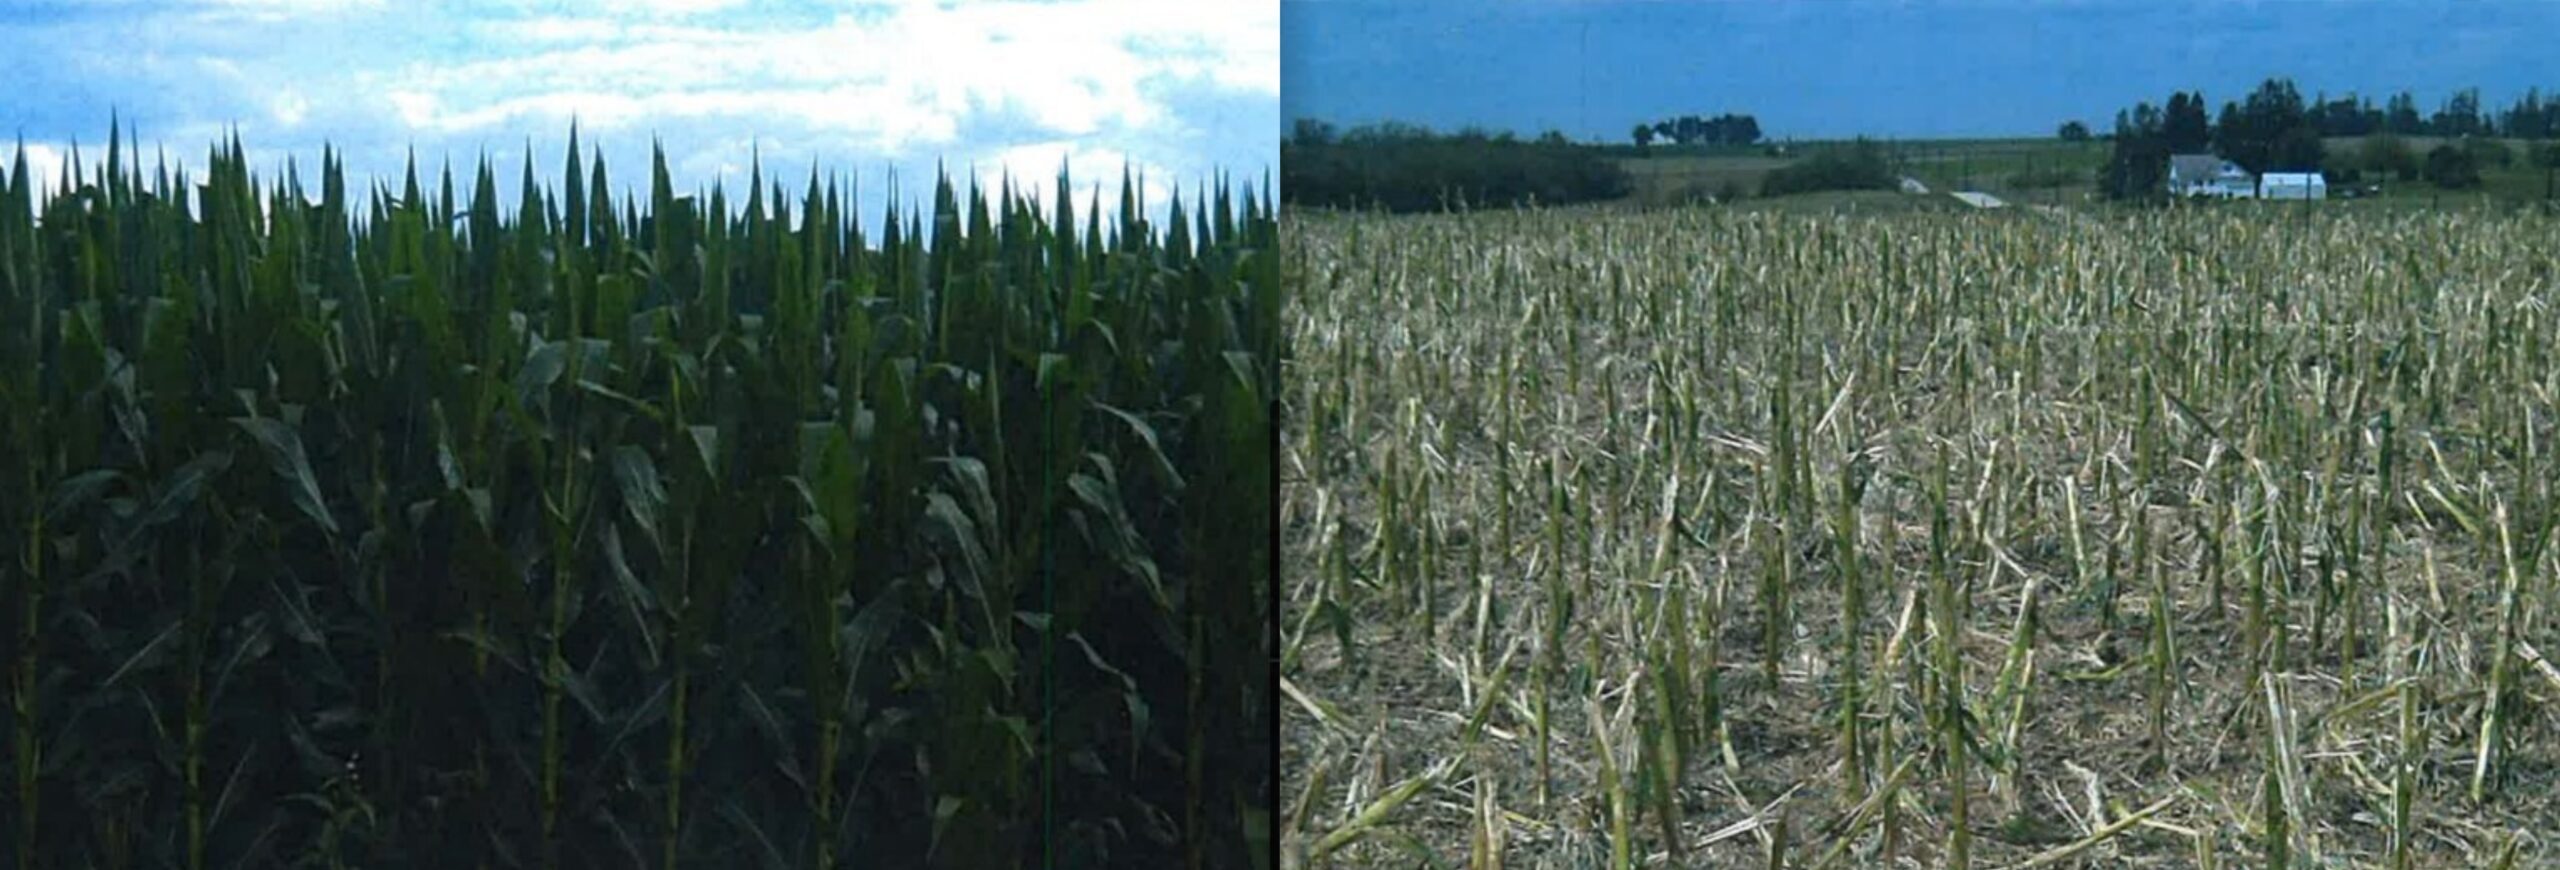 Before & After Crop Insurance